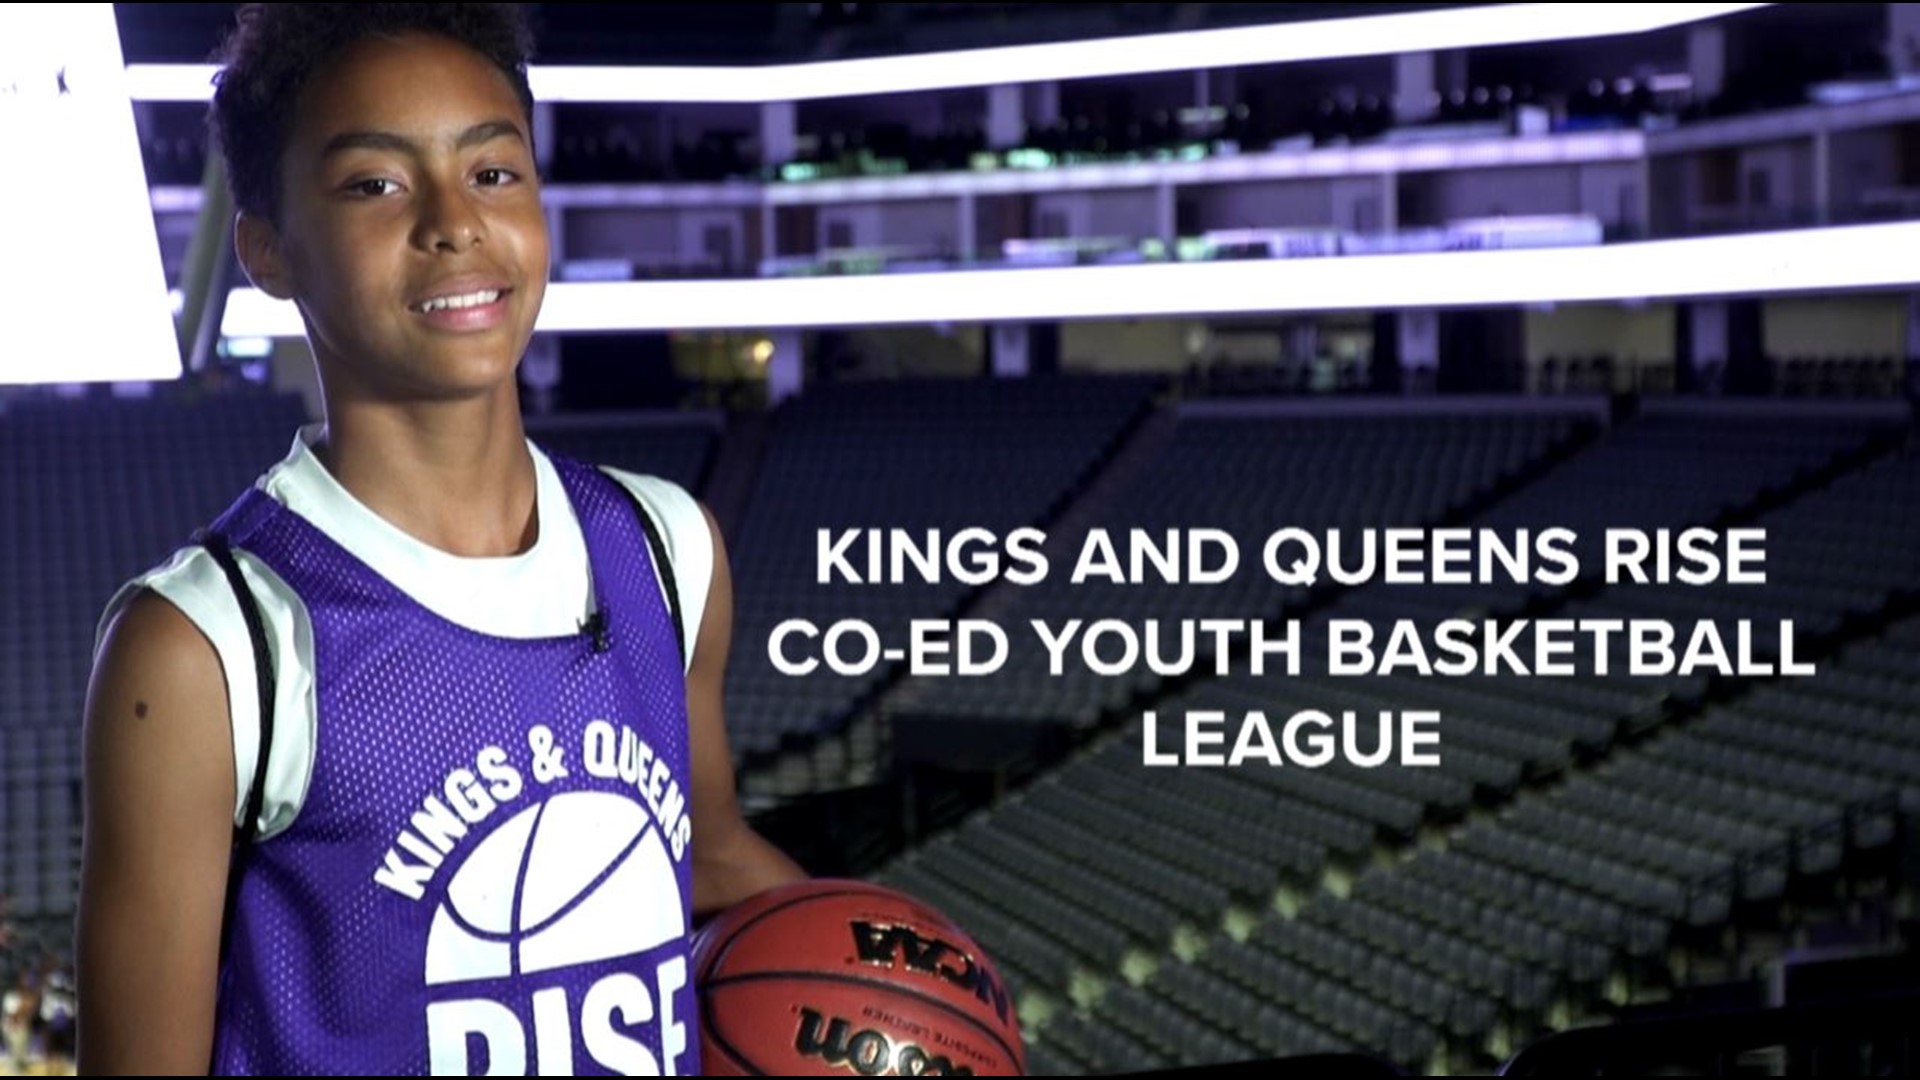 The Sacramento Kings are enjoying their offseason but their court was put to good use at the Golden 1 Center on Tuesday night for the Kings and Queens Rise Co-Ed Youth Basketball Championships.